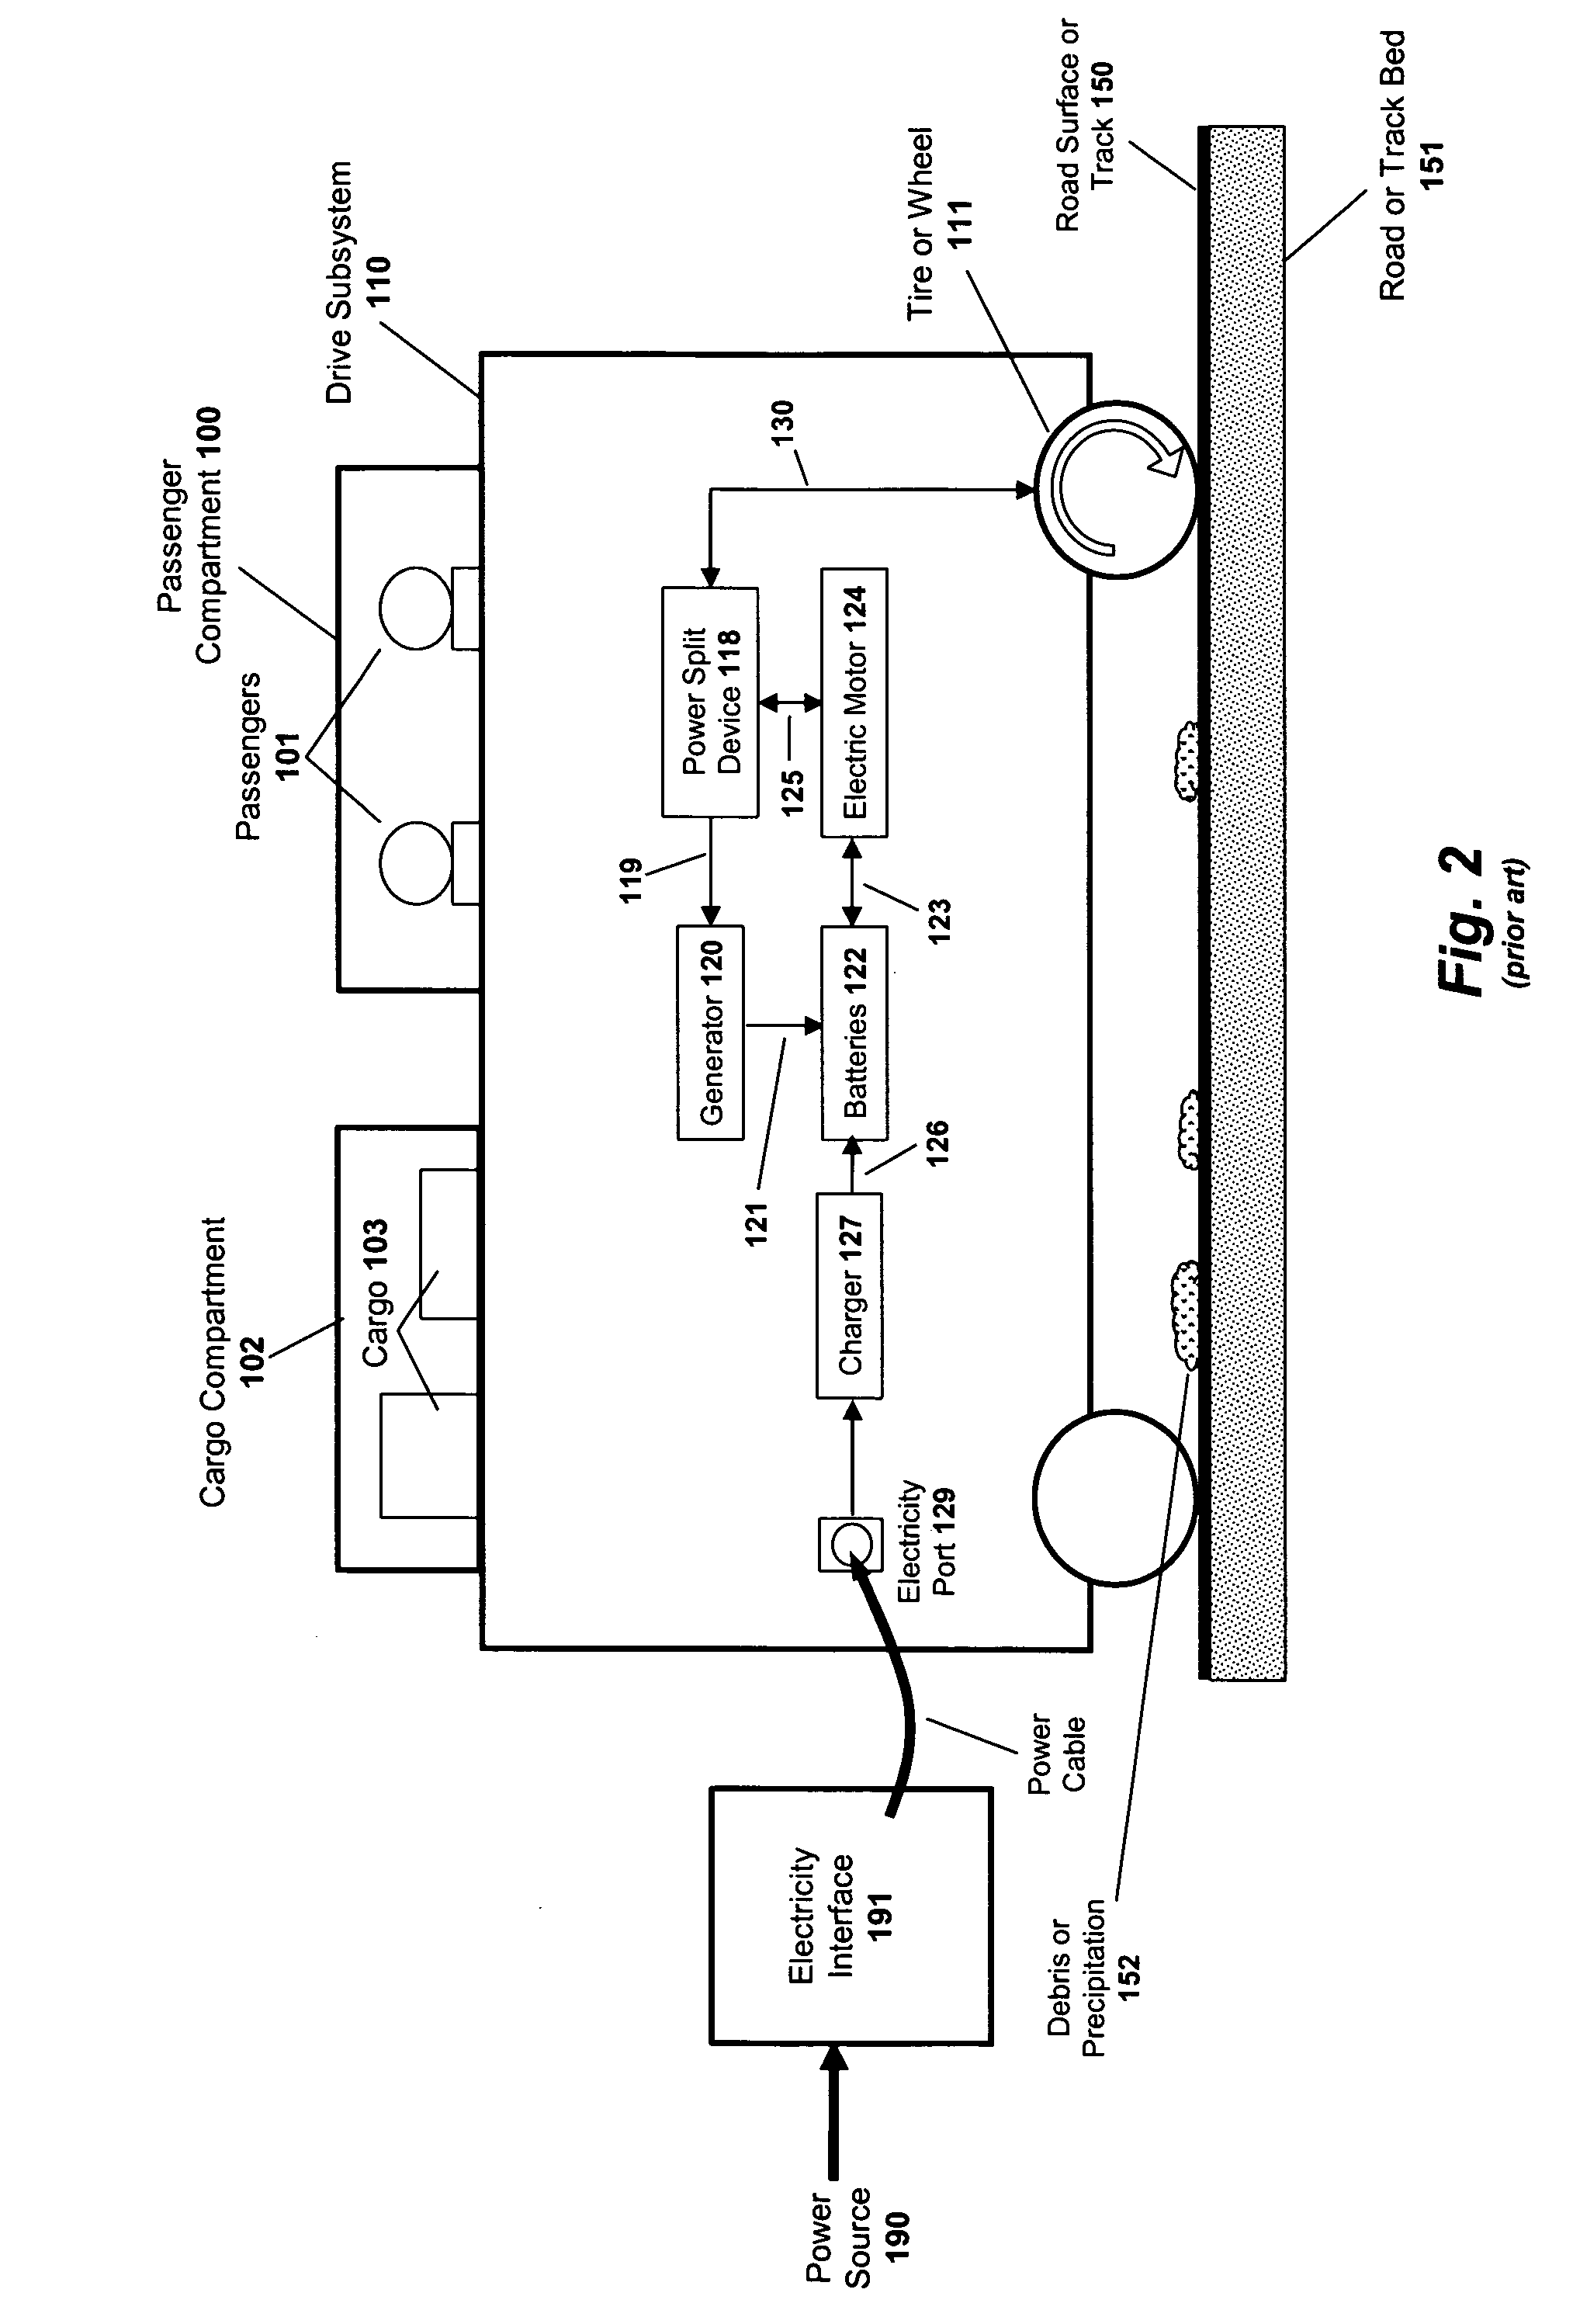 System and method for powering an aircraft using radio frequency signals and feedback